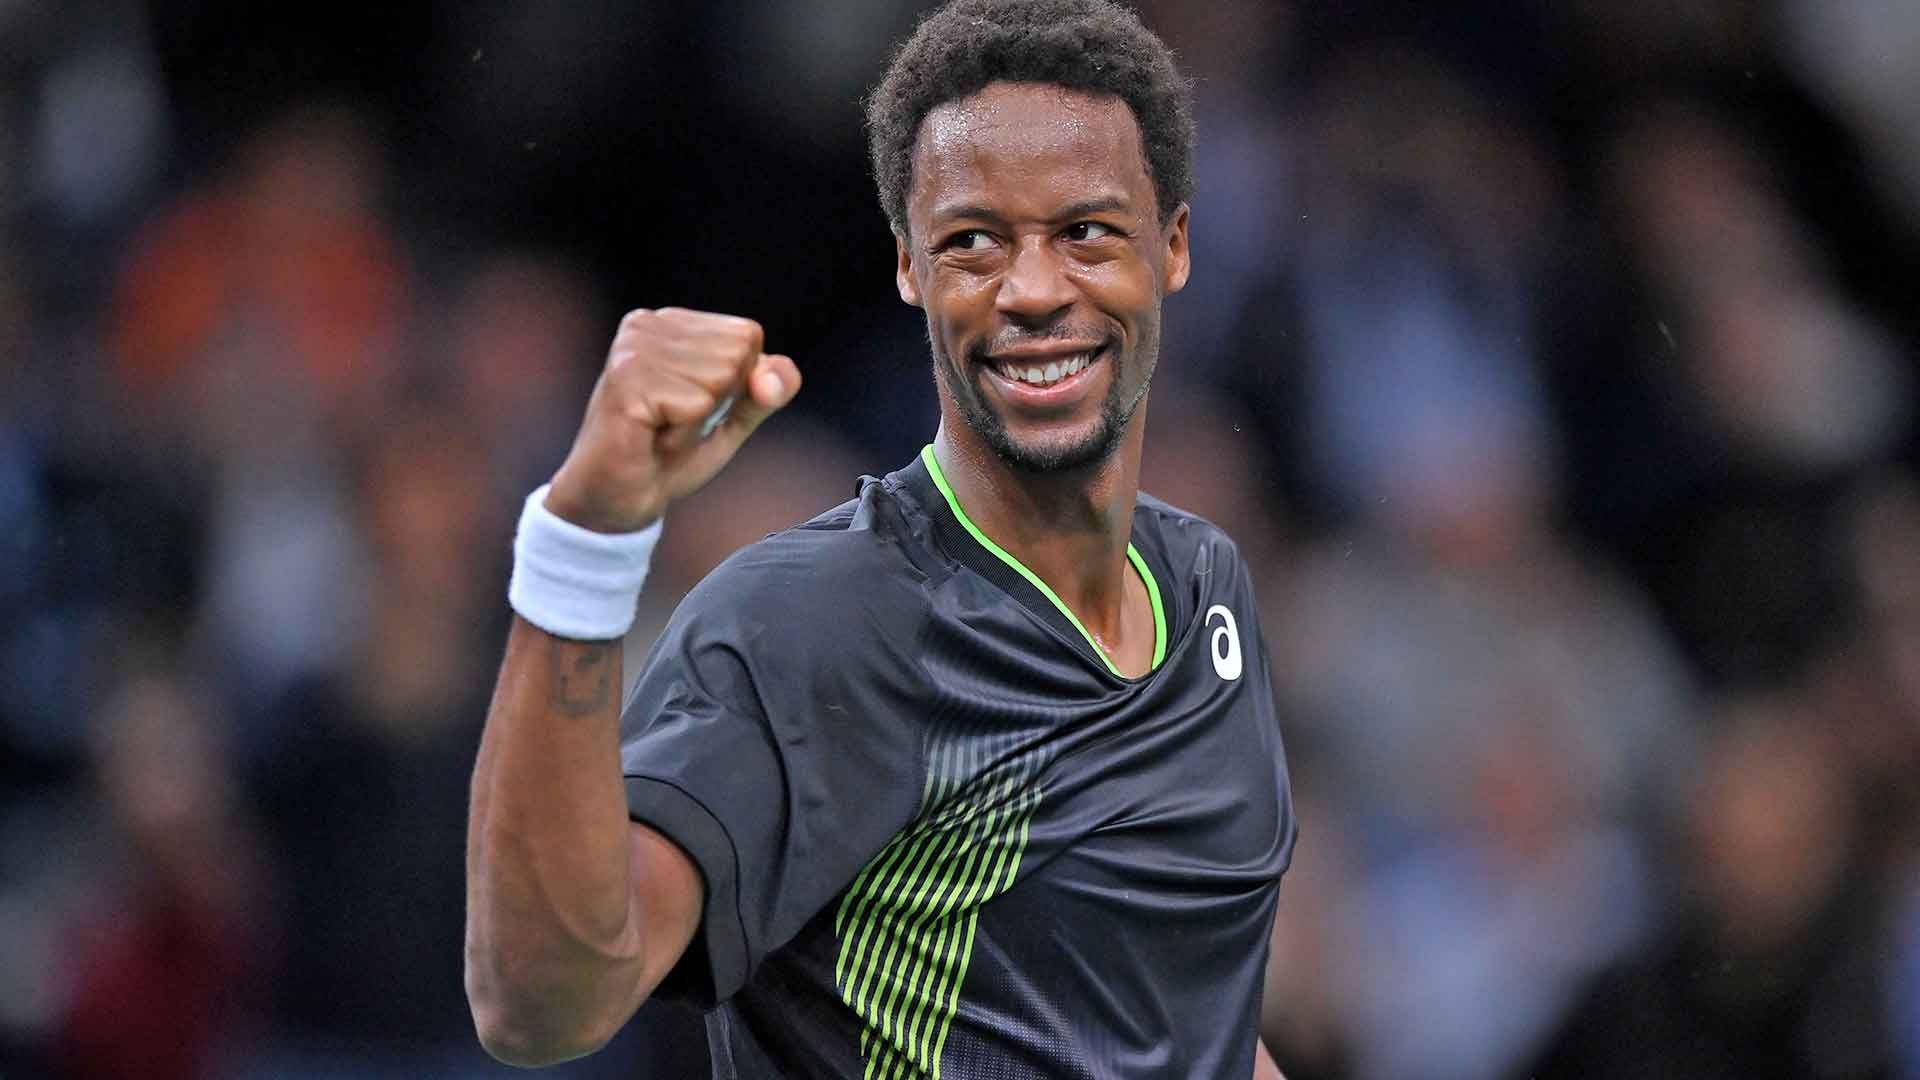 Monfils Adelaide1 2022 Draw Preview